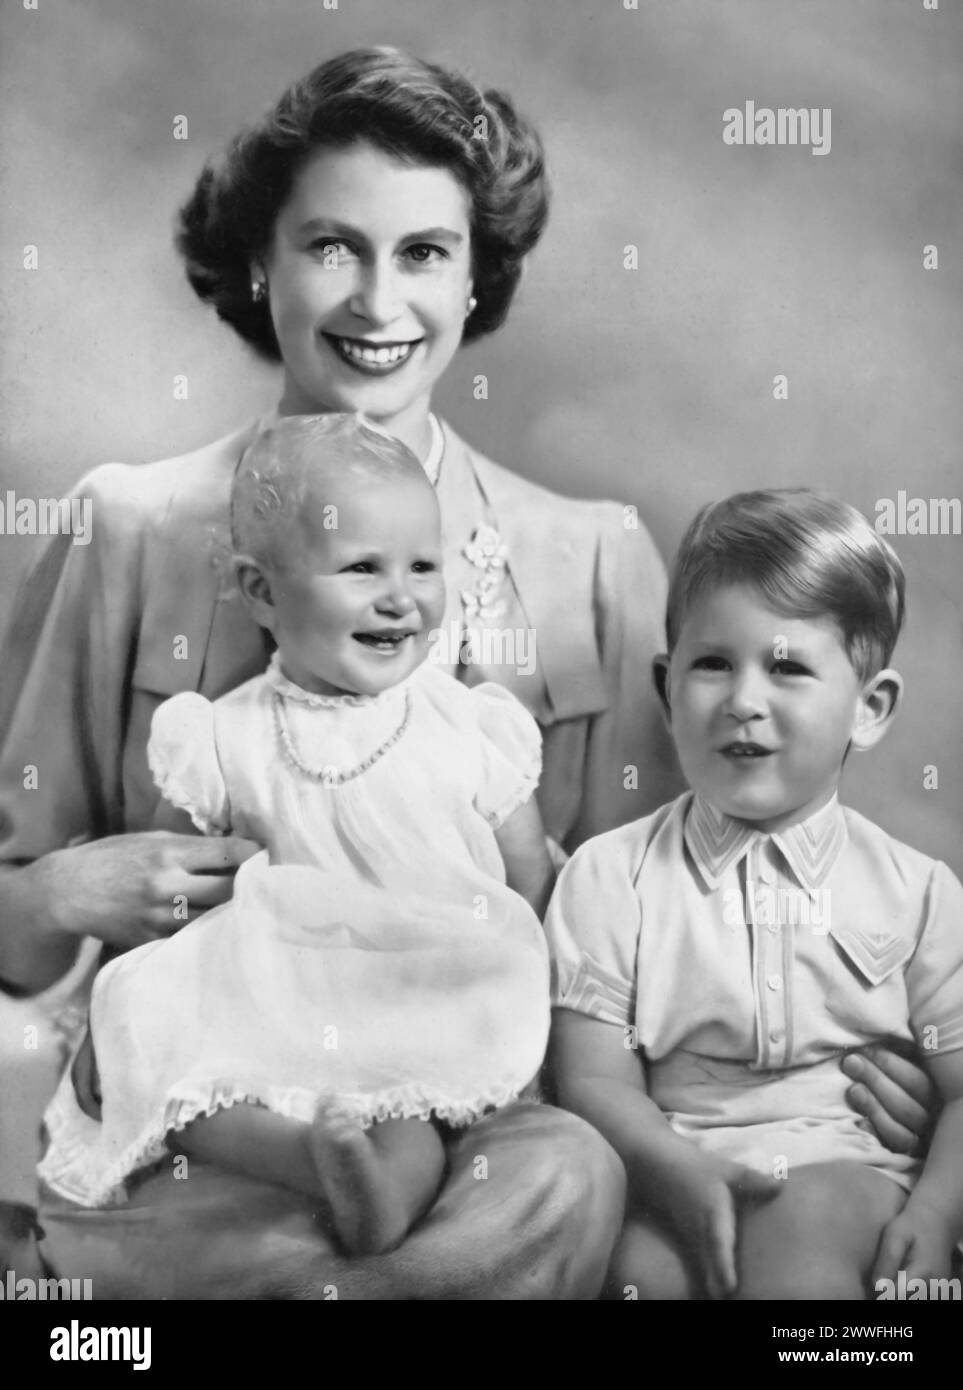 Elizabeth II is pictured with her first two children, Charles III and Princess Anne, in a portrait that captures a moment of royal family life before her ascension to the throne. Taken circa 1951, this image shows Elizabeth as a princess, mother to Charles, who would later become king, and Anne, providing a glimpse into their early years and the personal side of a family destined to lead the British monarchy. Stock Photo